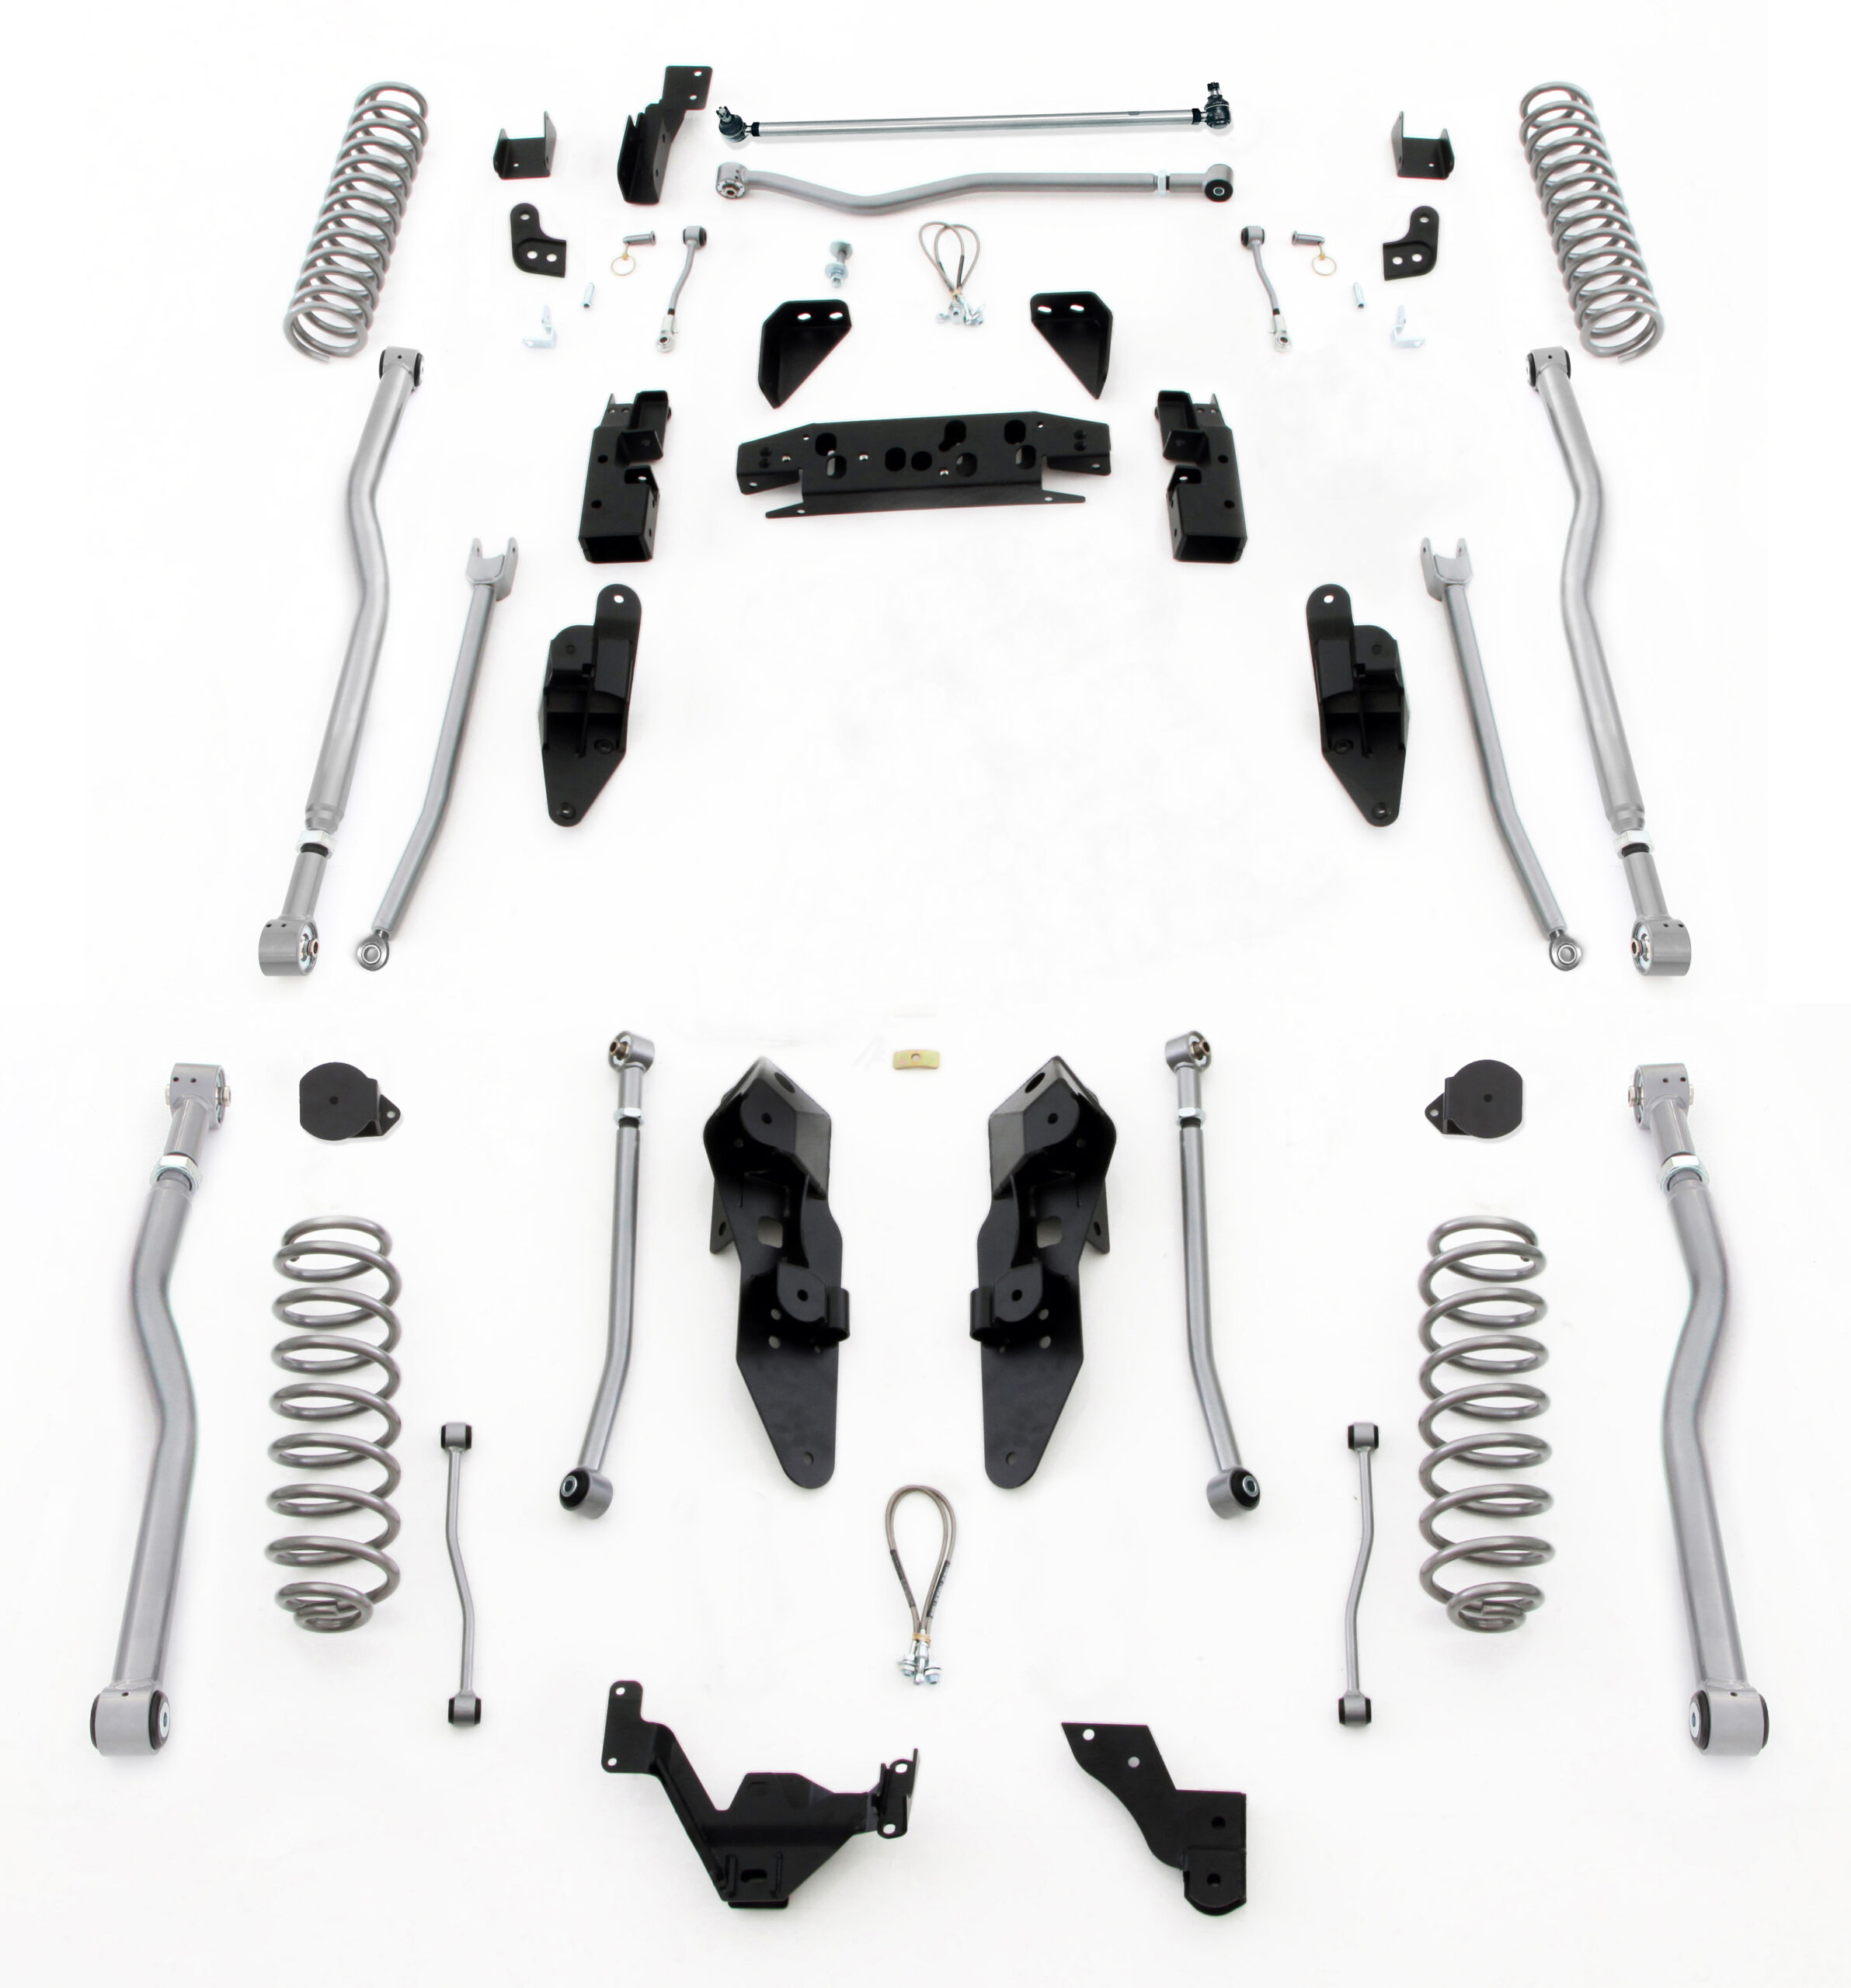 New Rubicon Express 4-Link Long Arm Suspension For Jeep JK